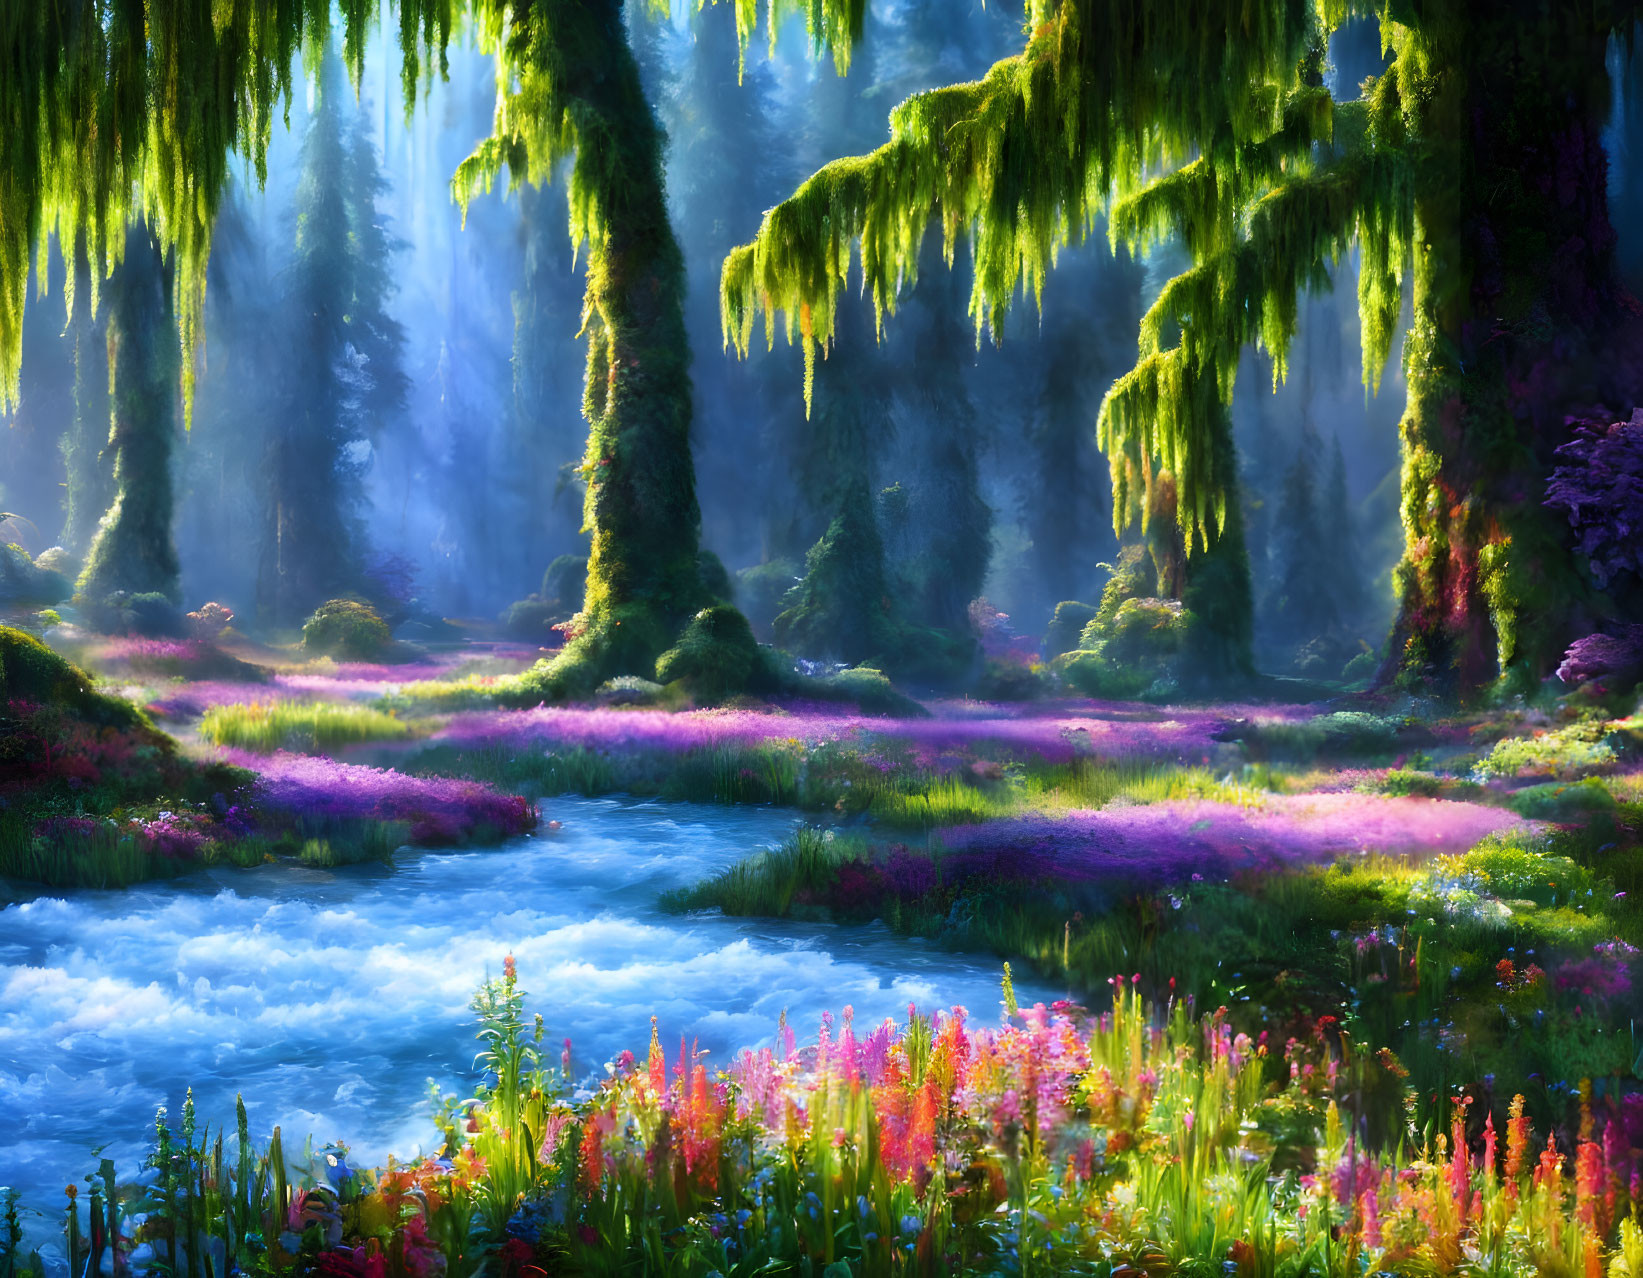 Lush enchanted forest with moss-covered trees and wildflowers beside a serene blue stream under misty sunlight